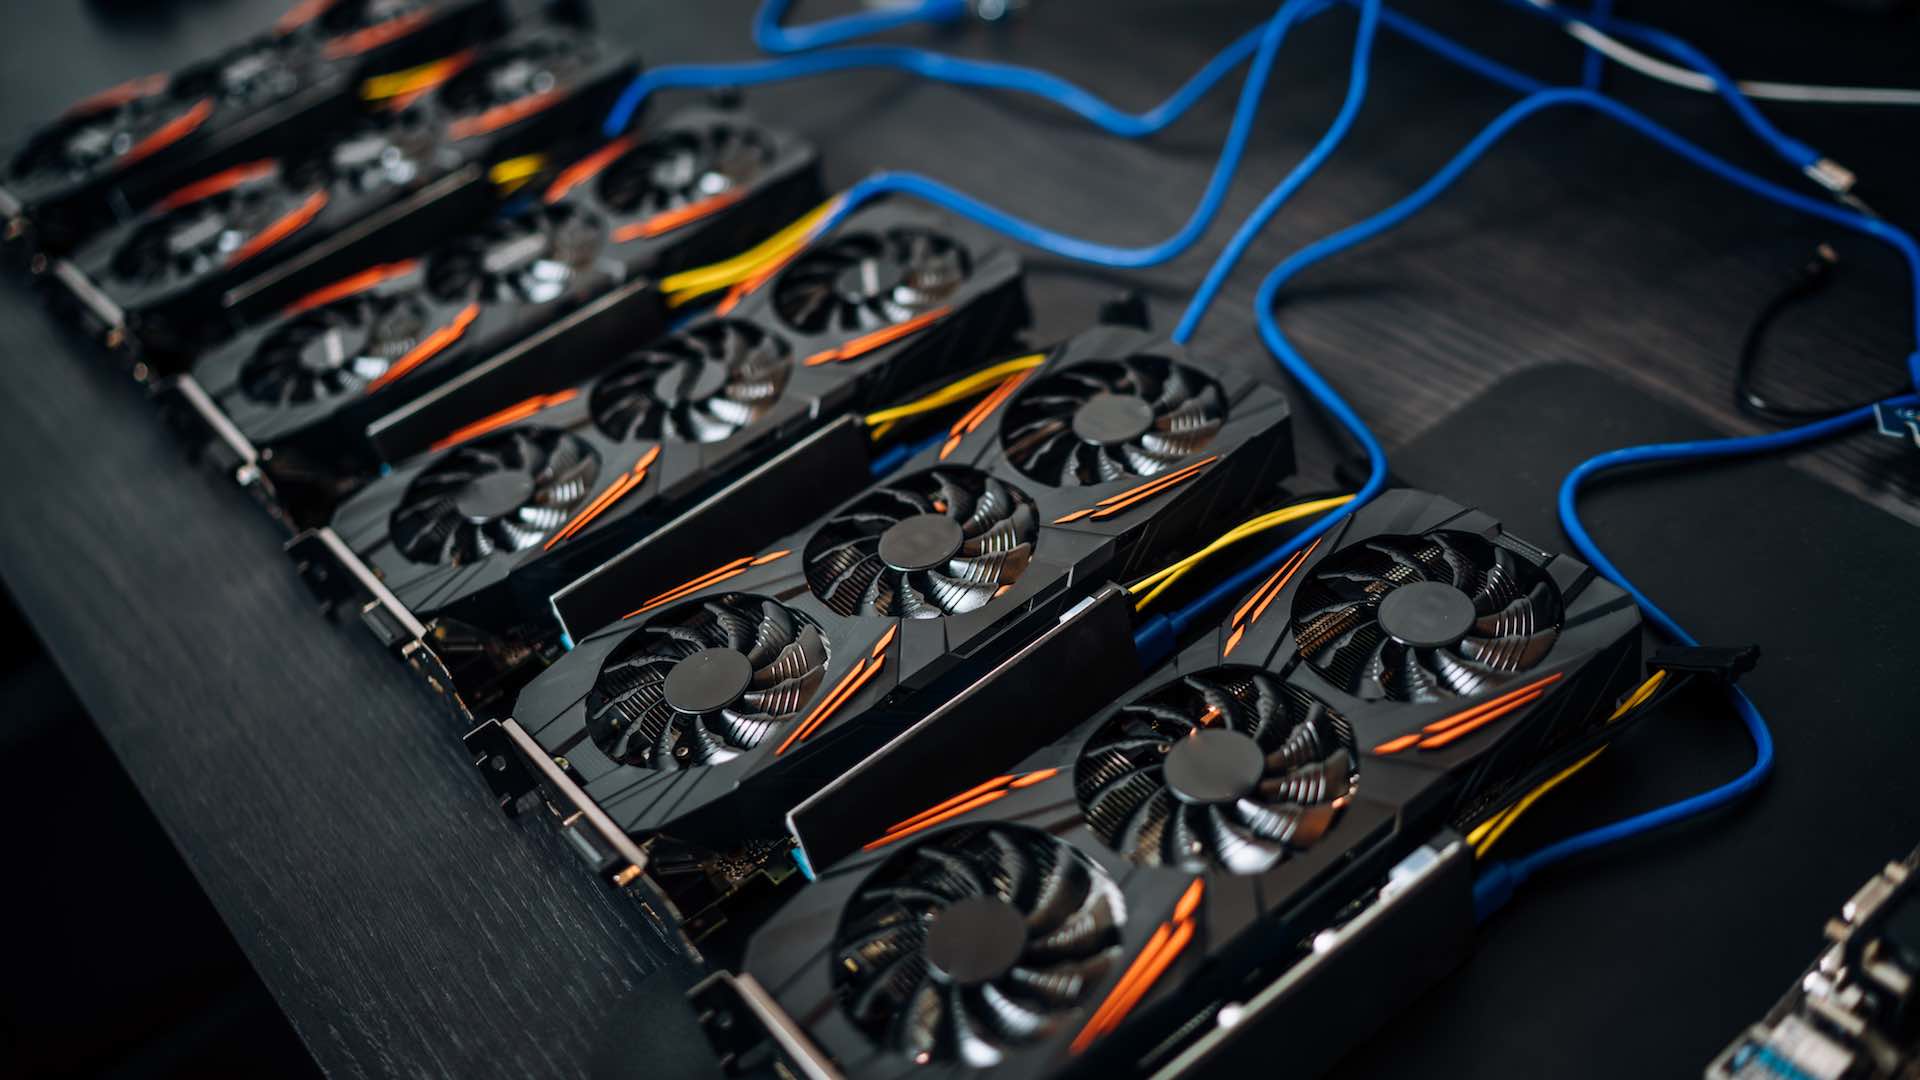 China Says Bitcoin Is Wasteful. Now It Wants to Ban Mining   WIRED